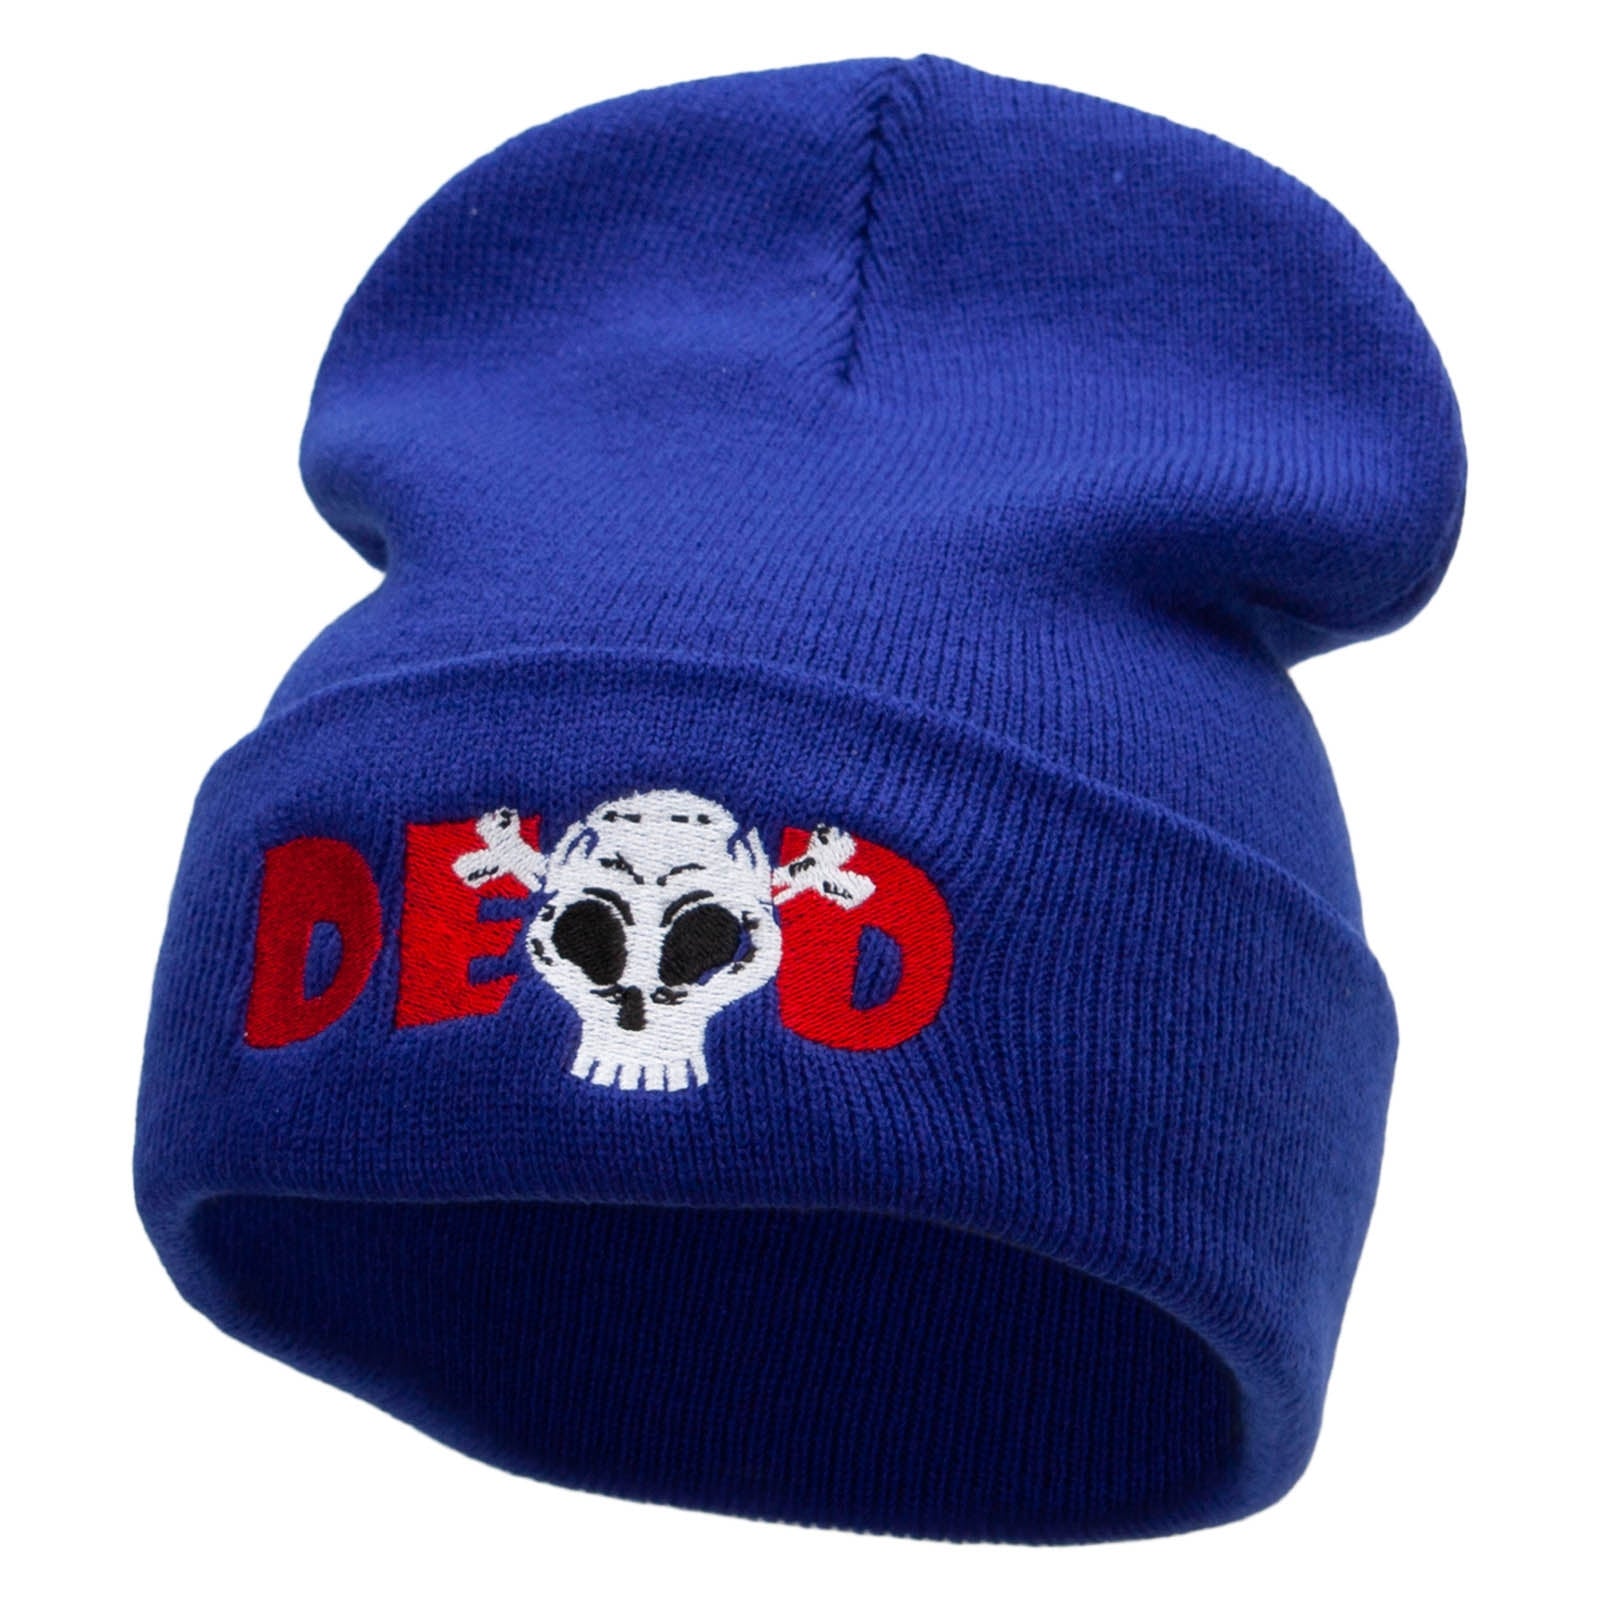 Dead Skull Embroidered 12 Inch Long Knitted Beanie - Royal OSFM